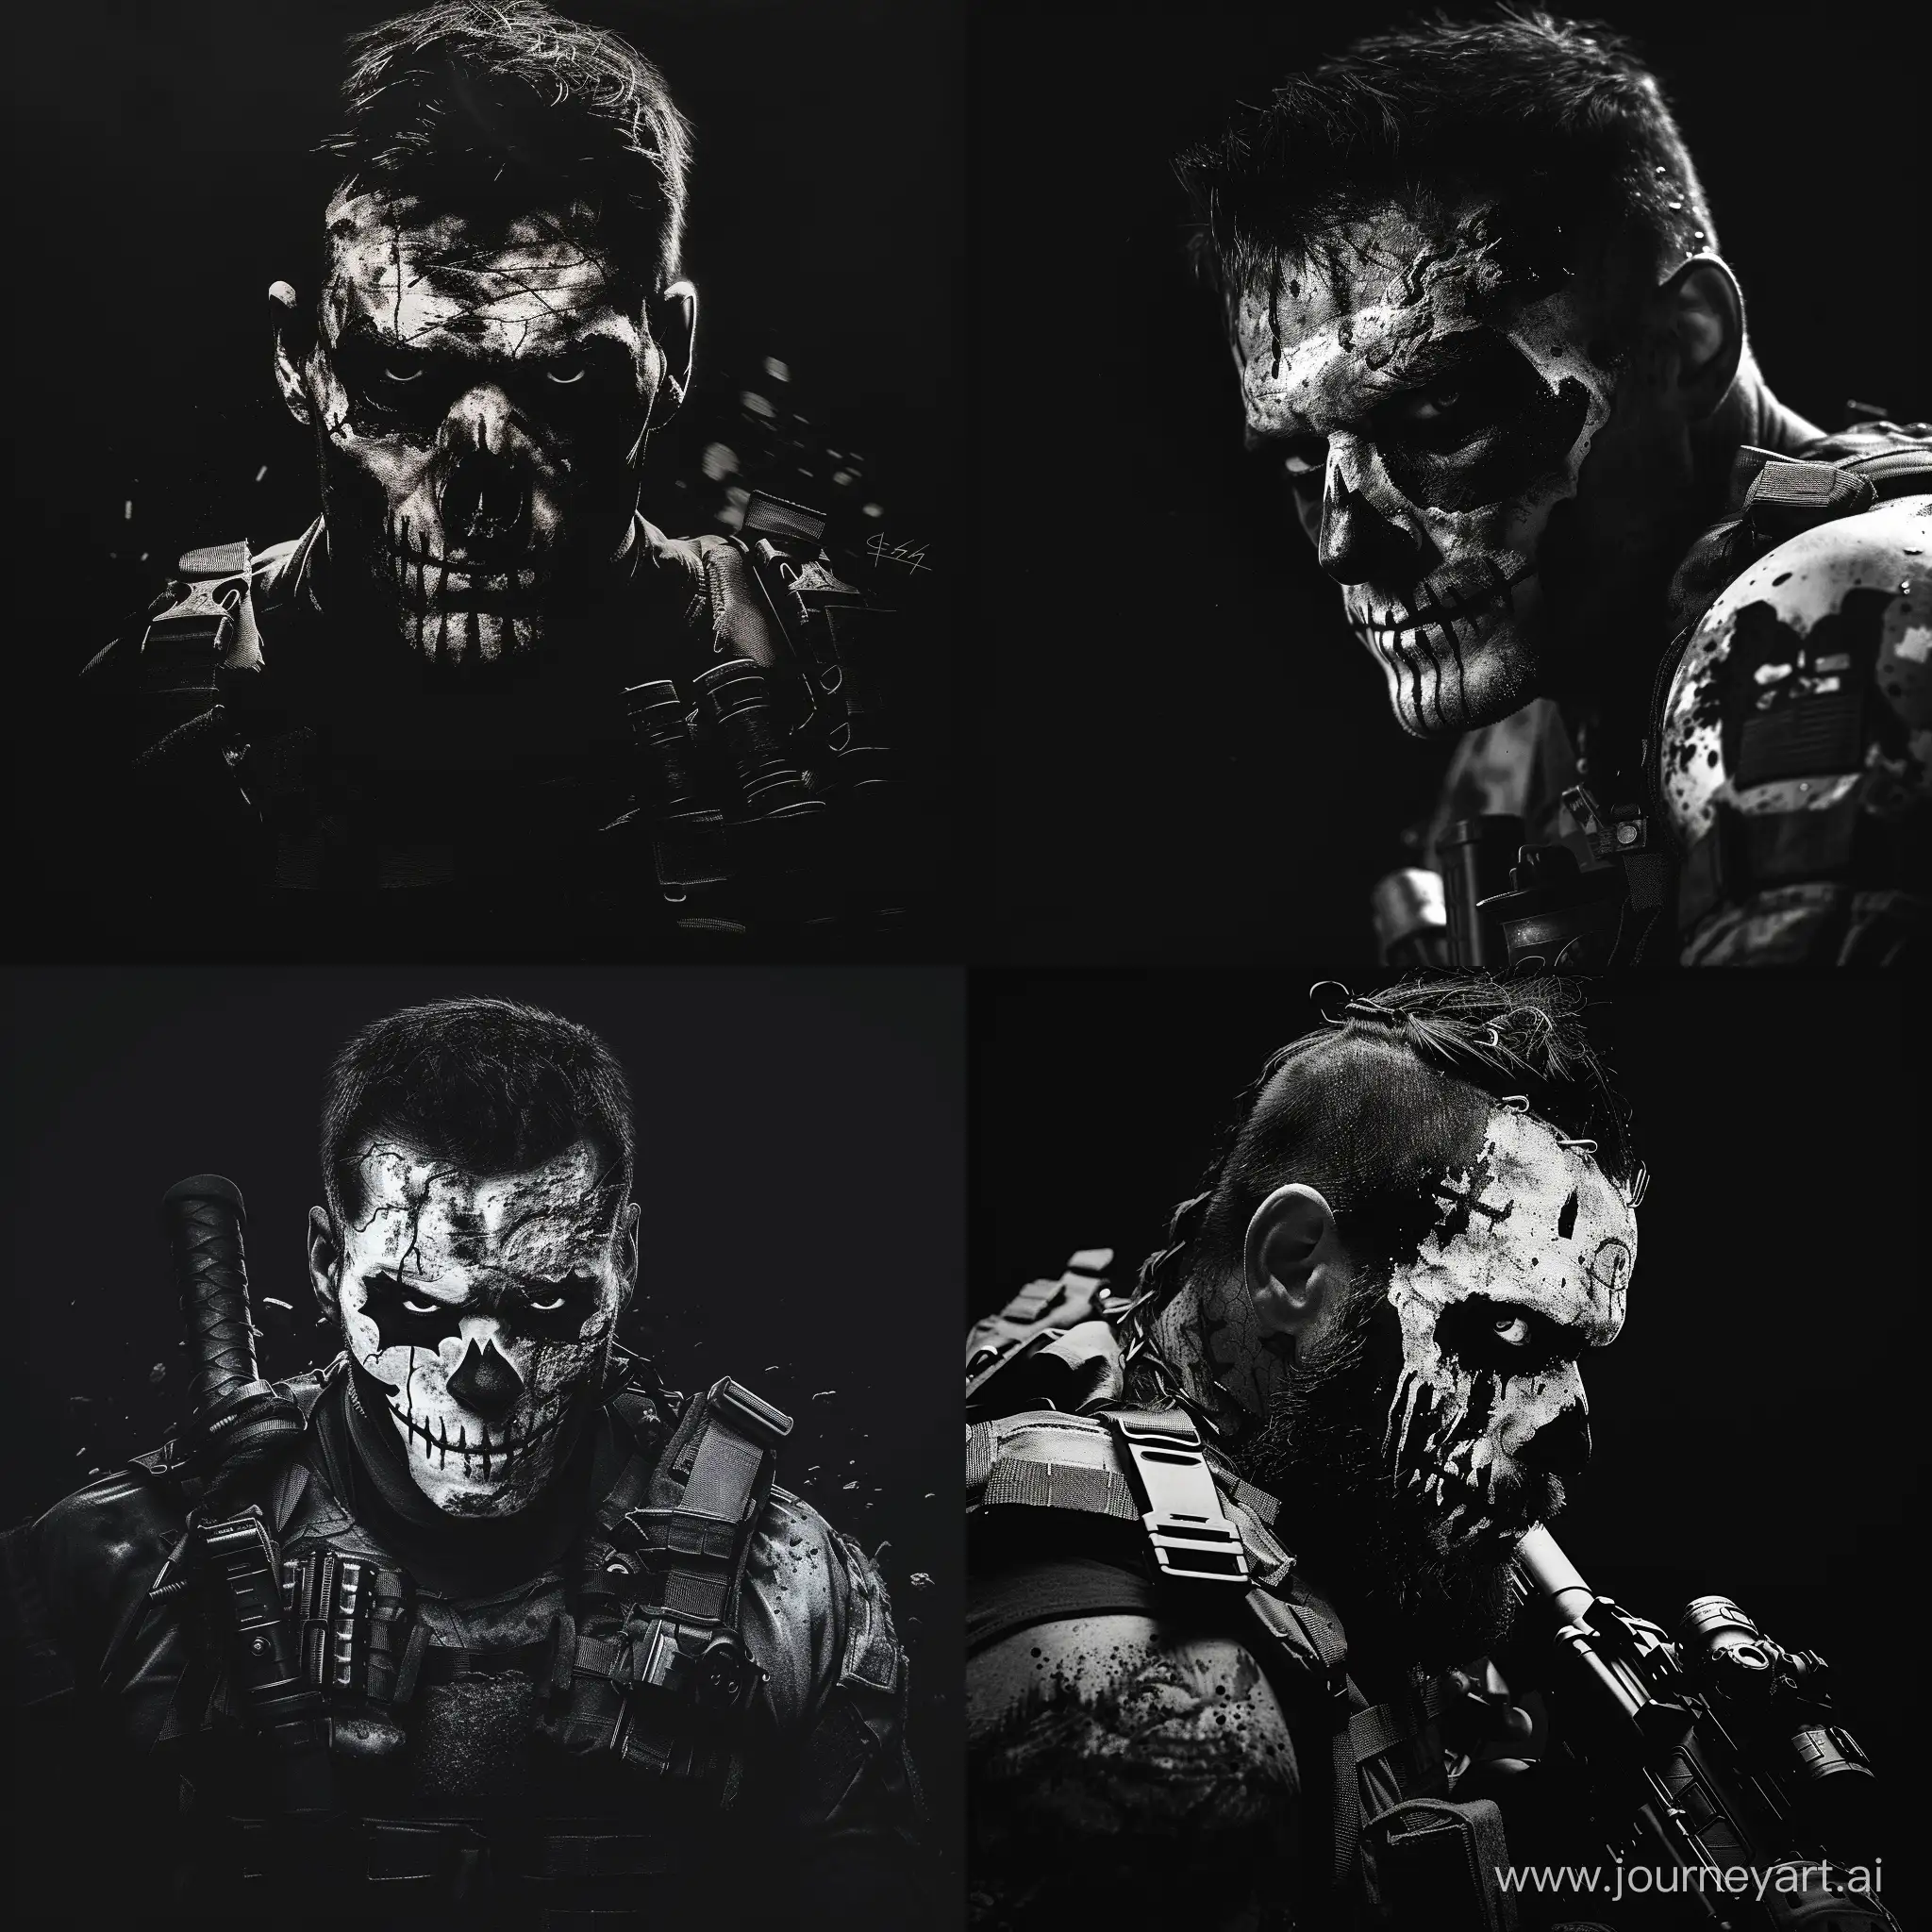 logo, man, crudely painted skull of punisher war paint, military equipment, black and white, black background